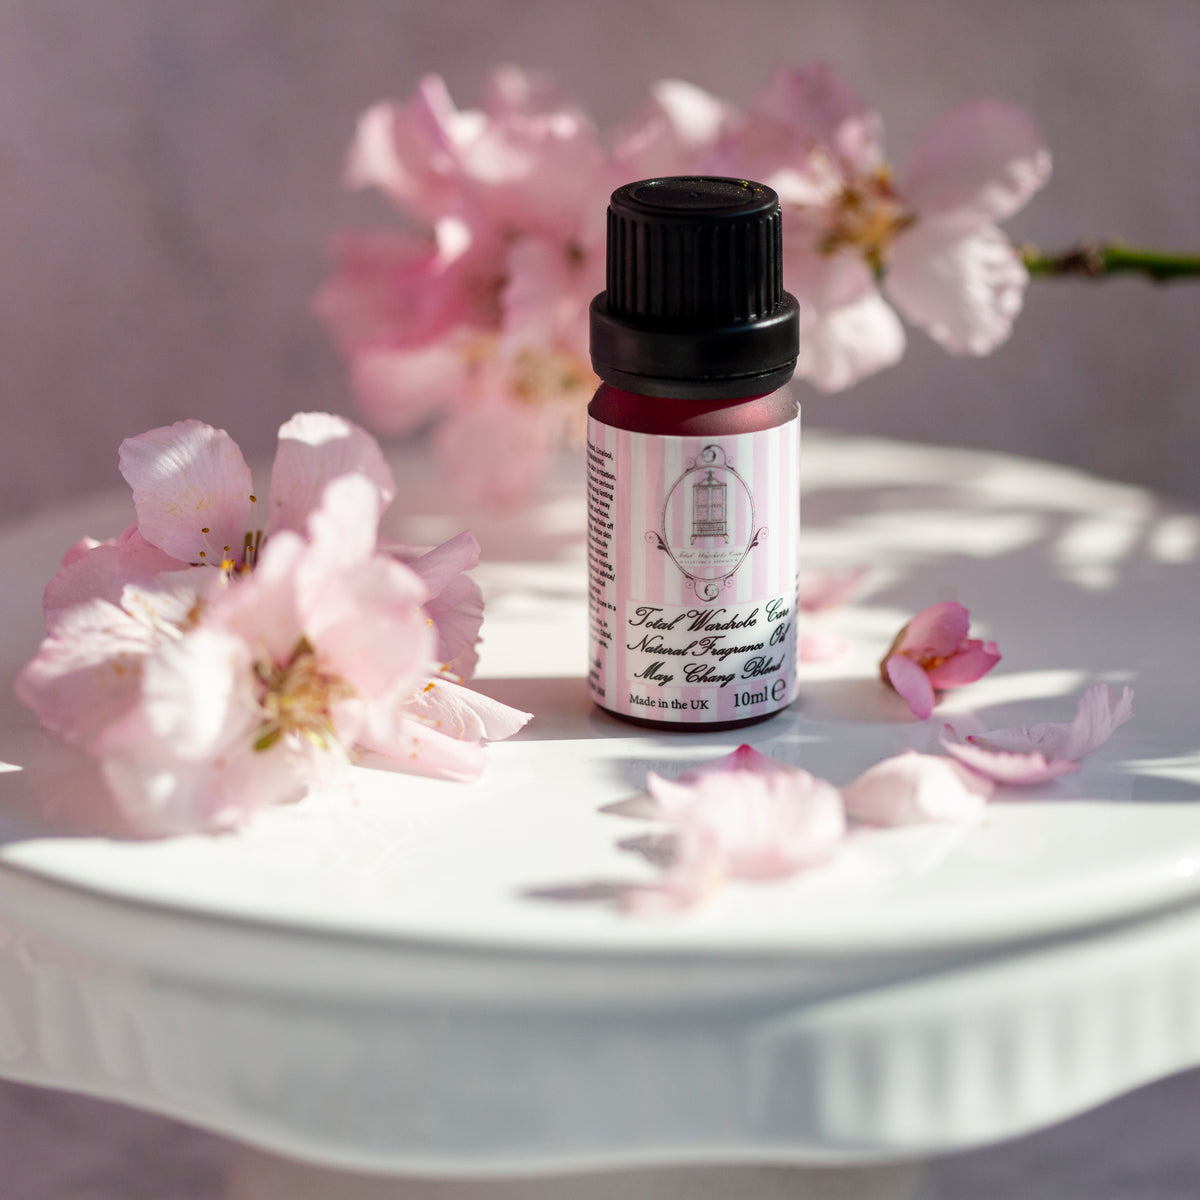 Small twist cap pink bottle of May Chang blend essential oil surrounded by pink flowers